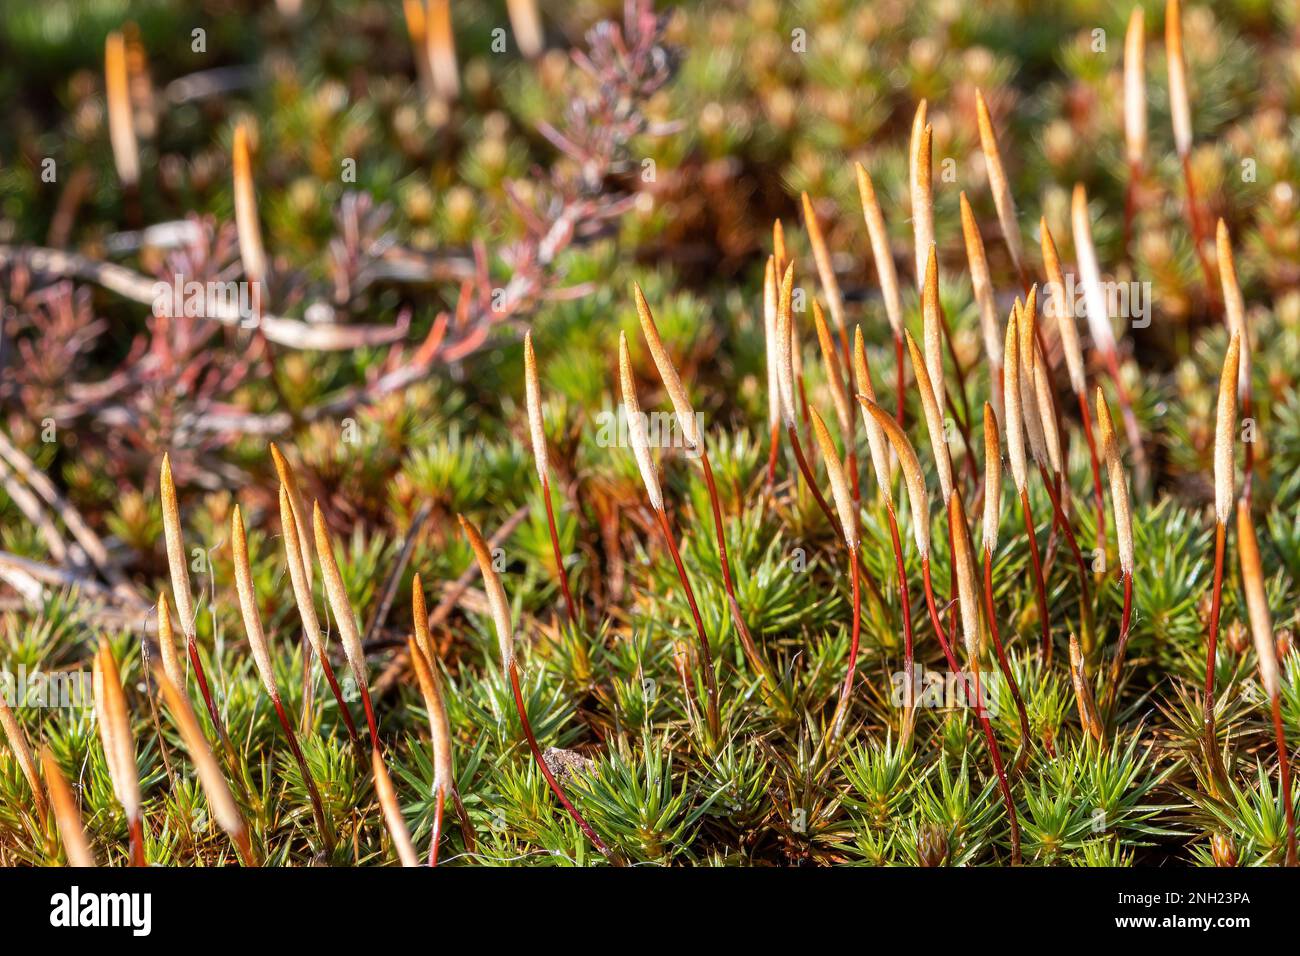 Spore capsules of Polytrichum piliferum moss, also called bristly haircap, with colourful caps or calyptrae, on sandy heathland in Surrey, England, UK Stock Photo